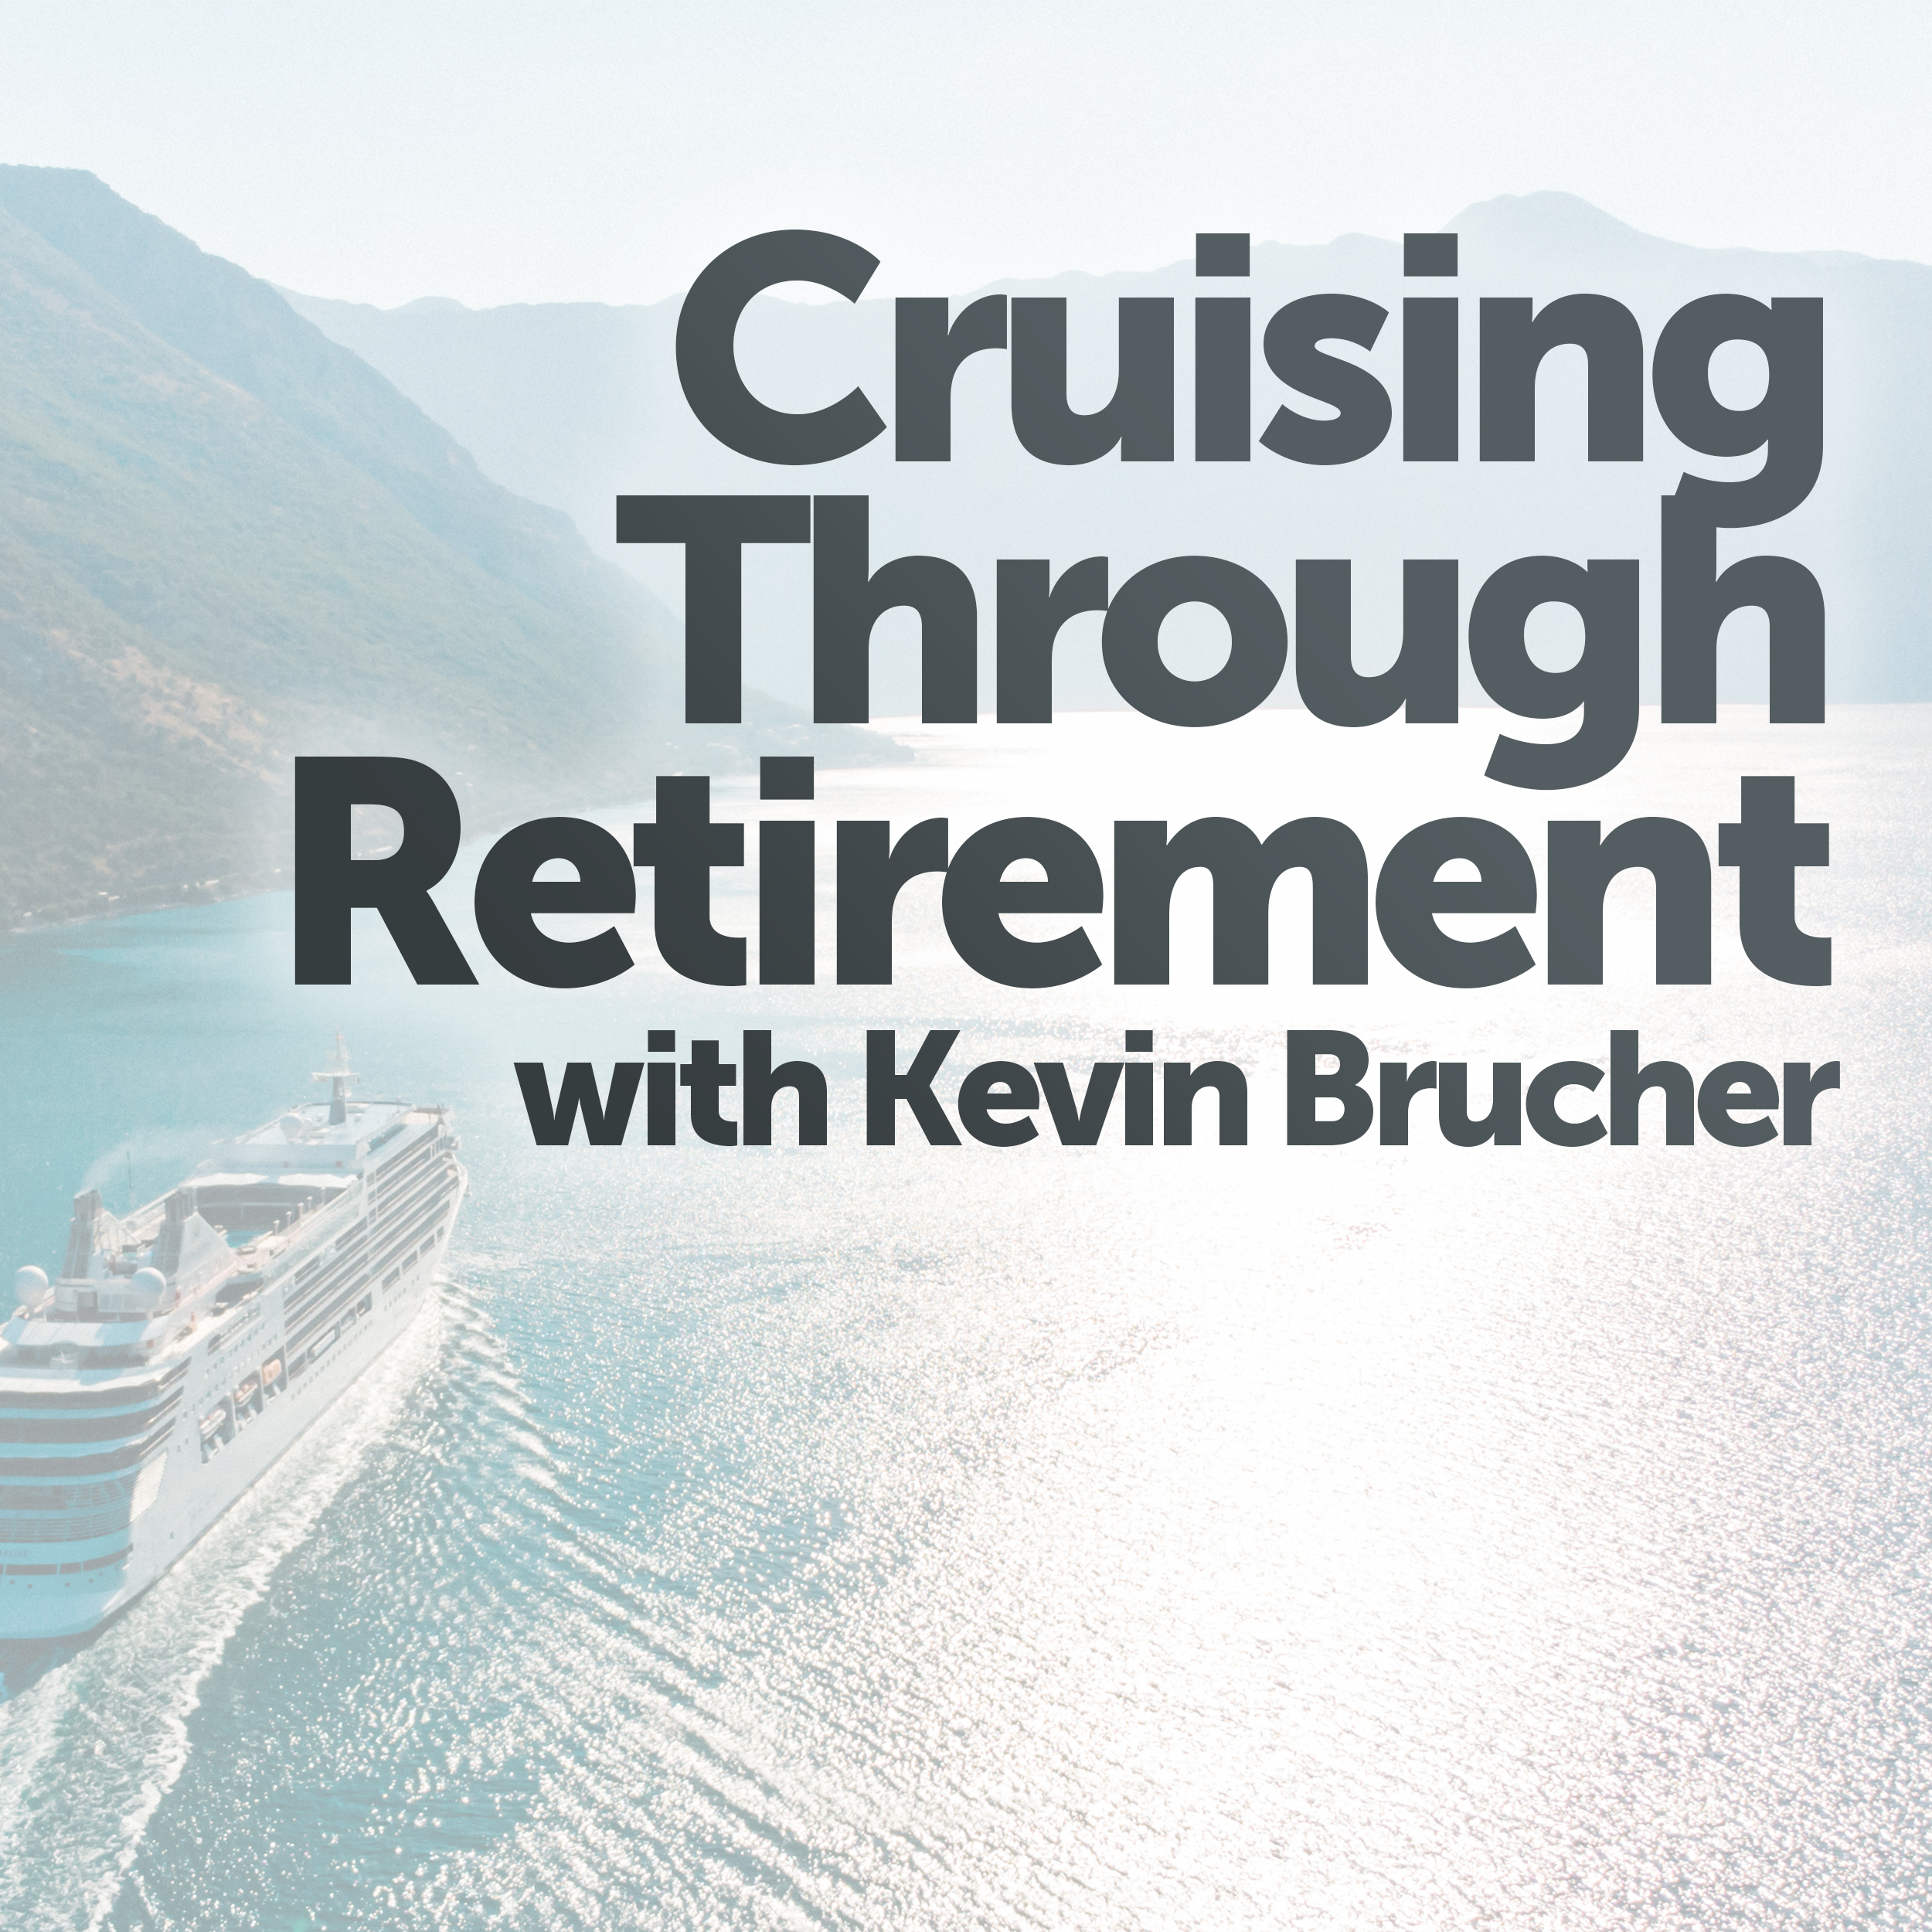 Kevin Brucher discusses low-risk investments for boosting income and profitability in retirement.